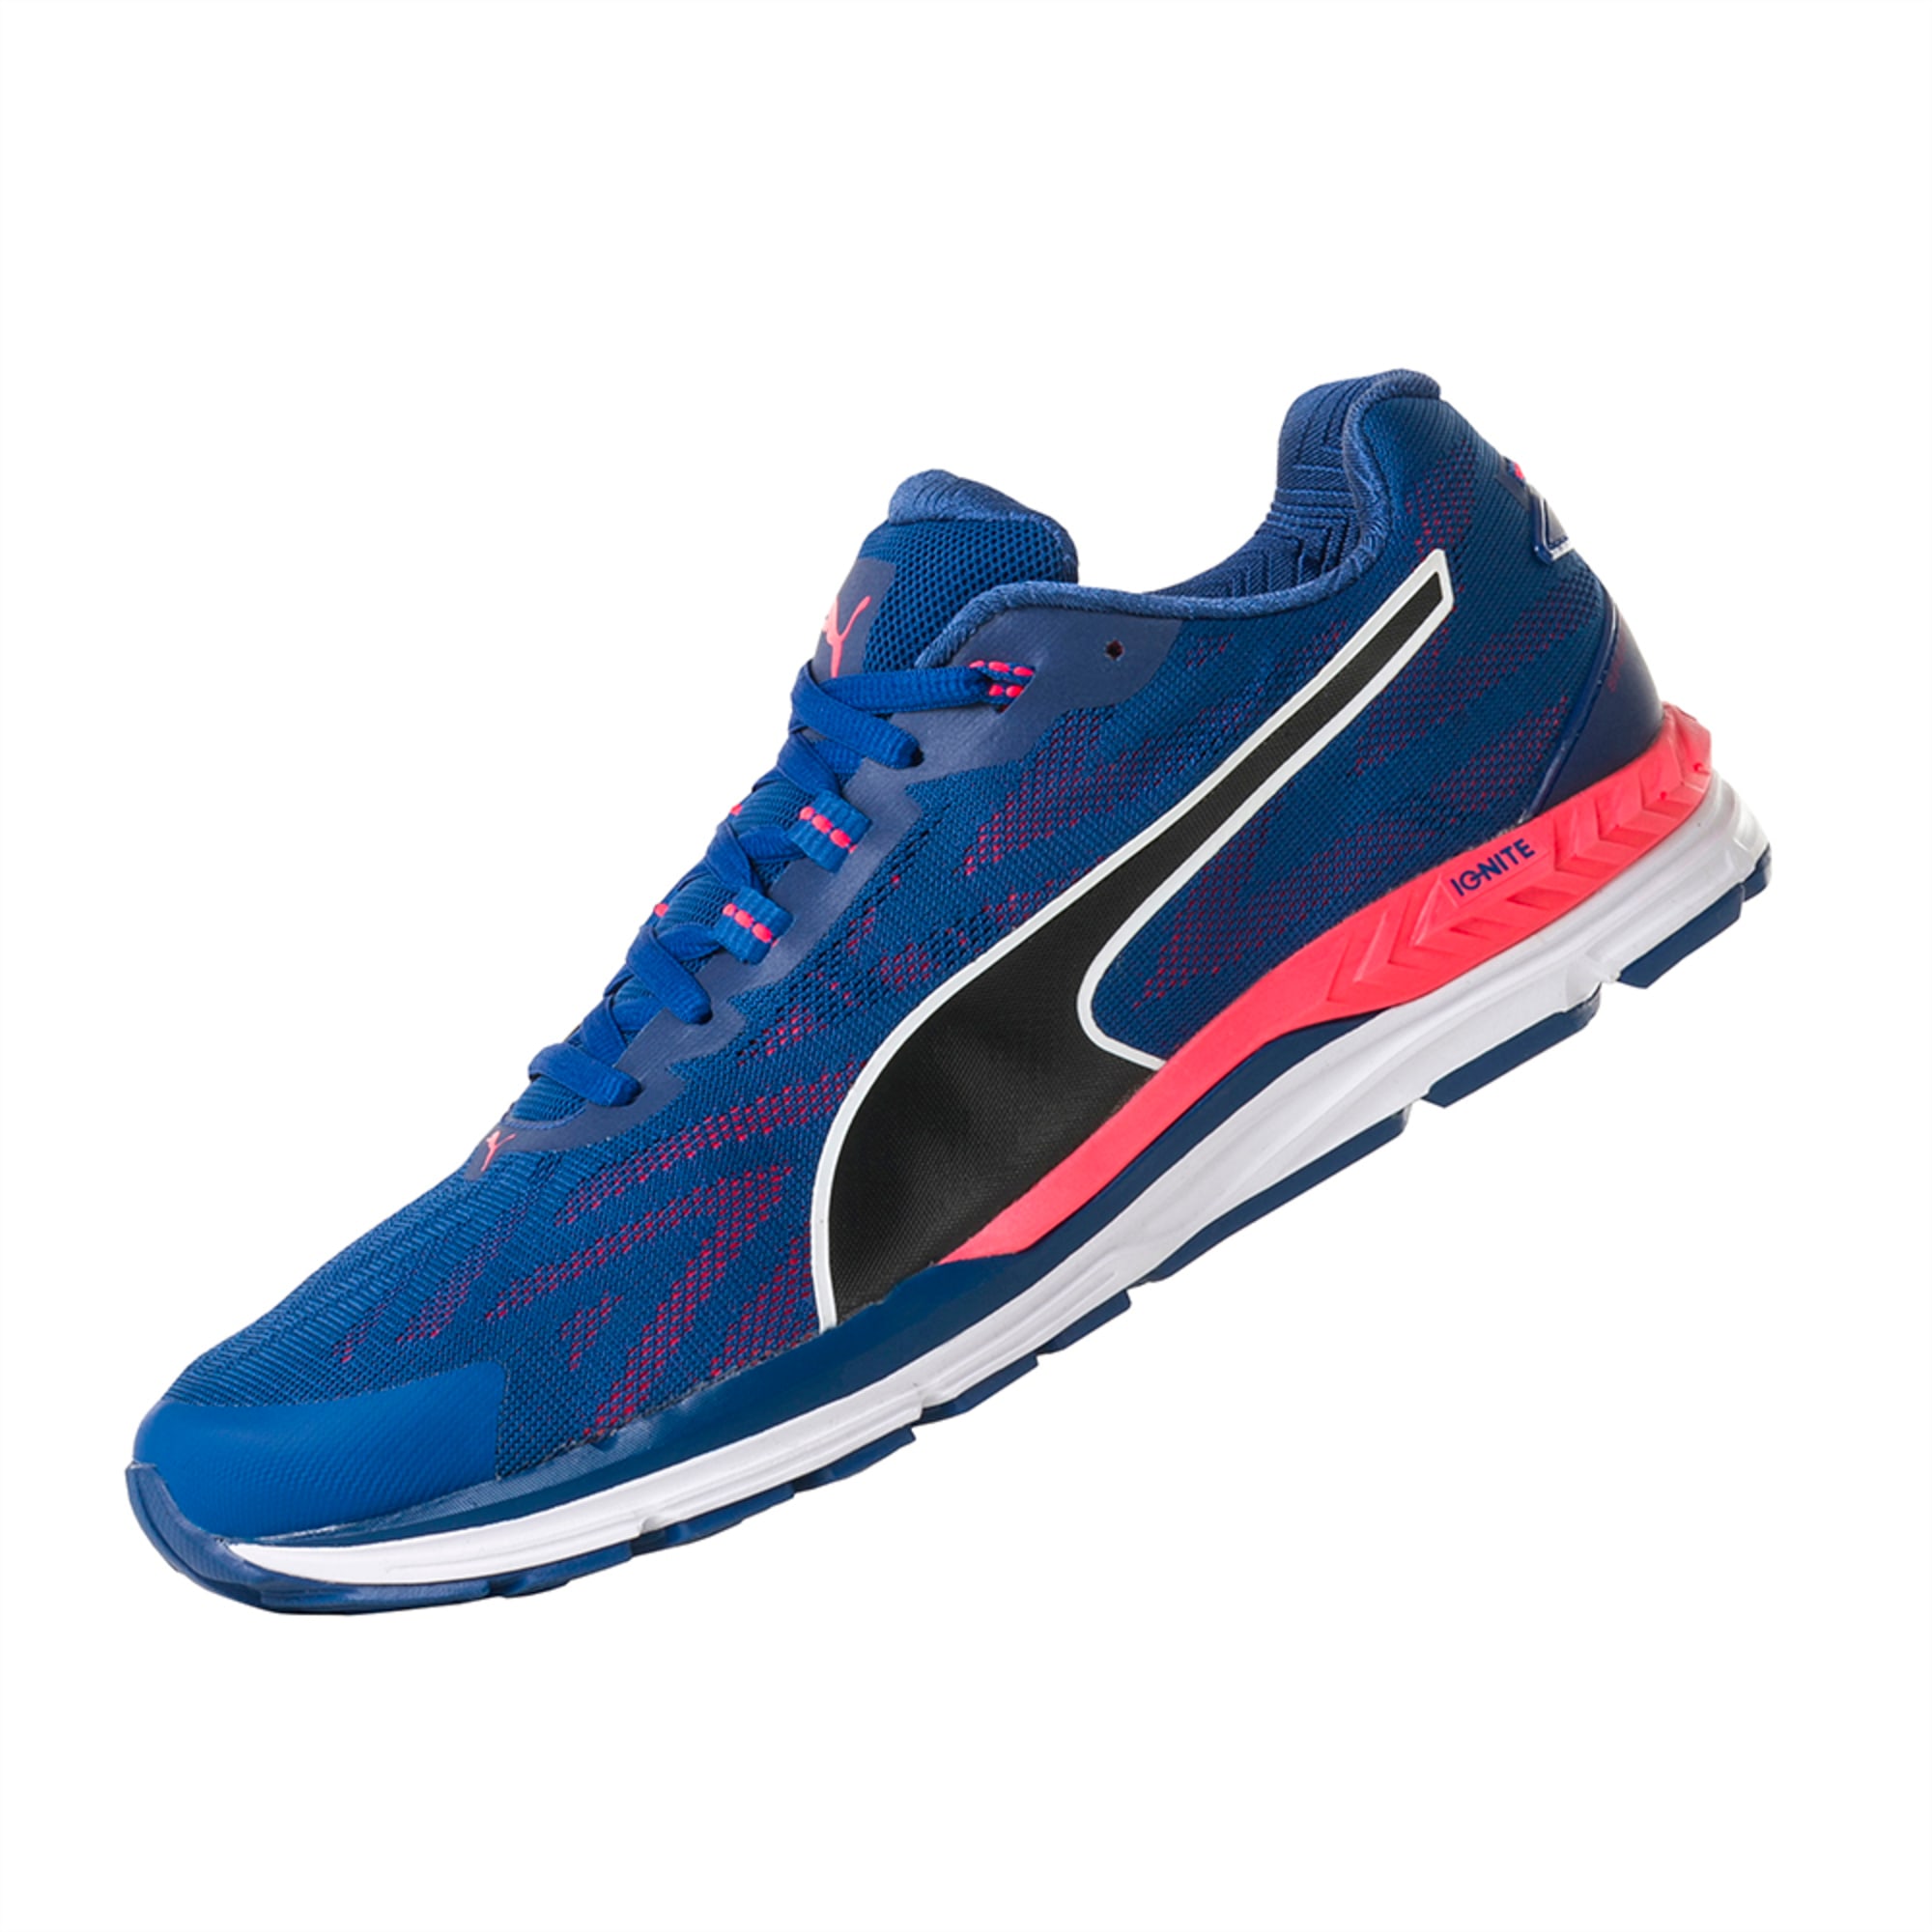 Speed 600 2 Men's Running Shoes | BLUE-Bright | Shoes | PUMA